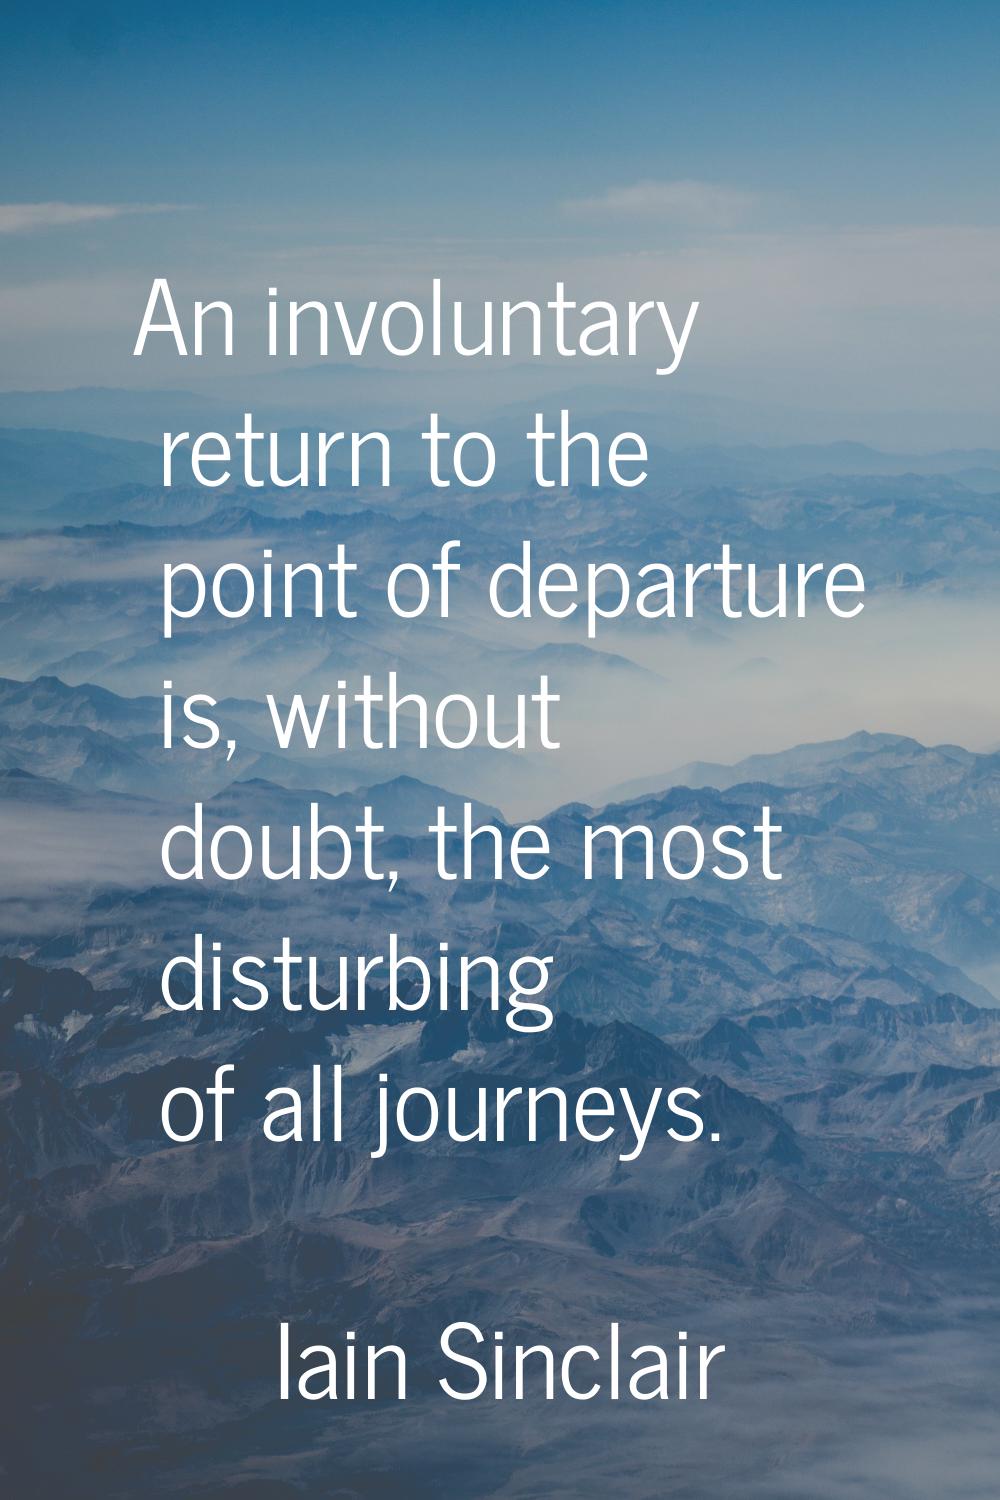 An involuntary return to the point of departure is, without doubt, the most disturbing of all journ